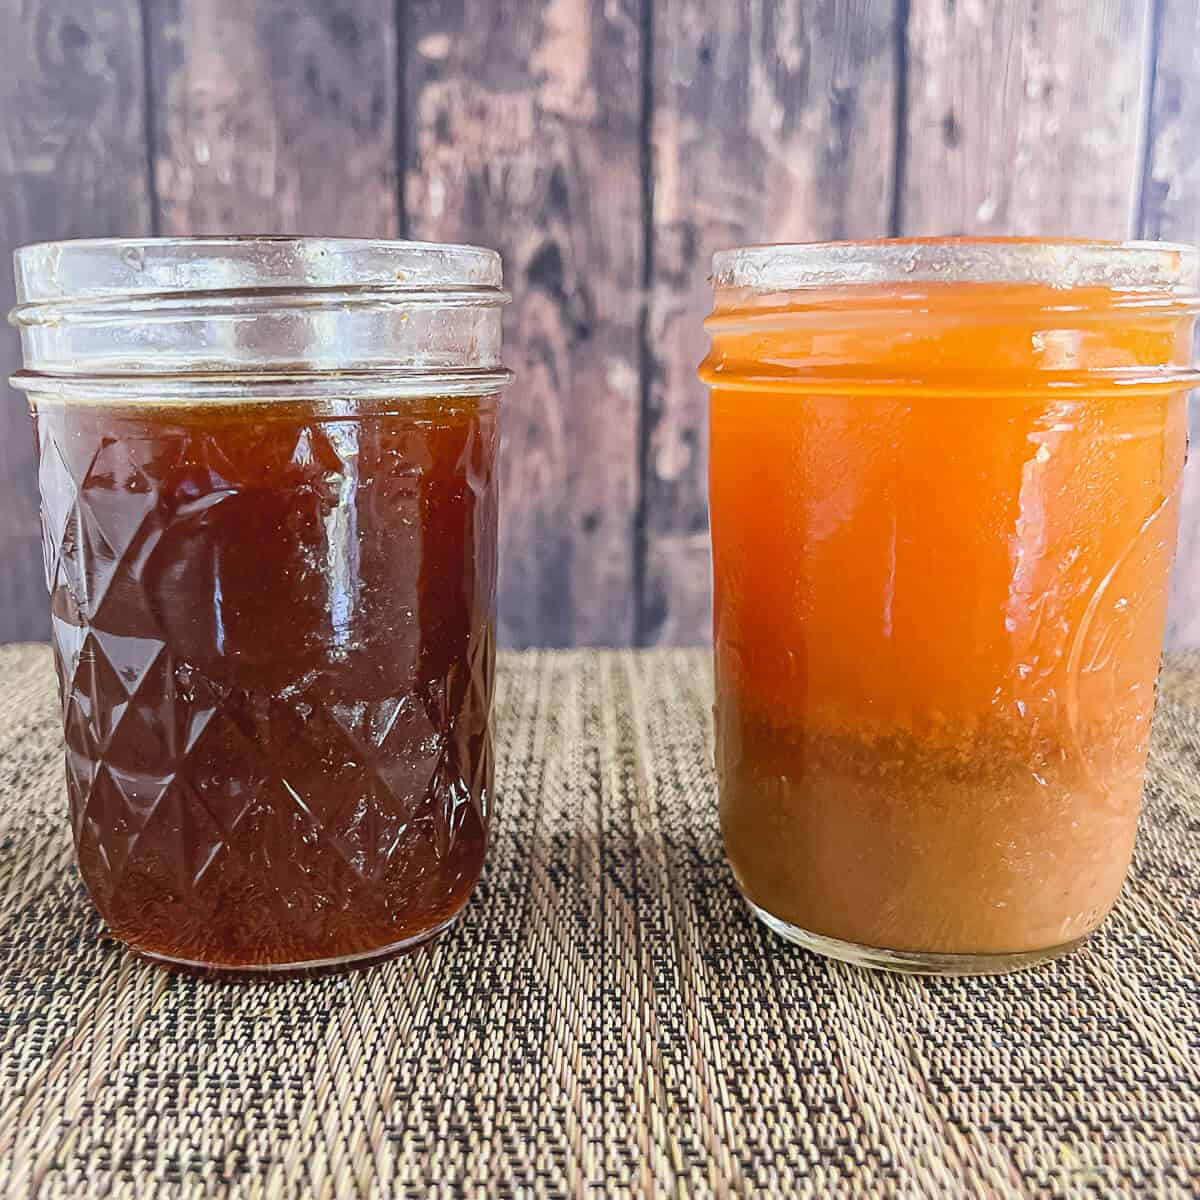 Two jars of boiled apple cider side by side, comparing properly made syrup vs. syrup with sediment.